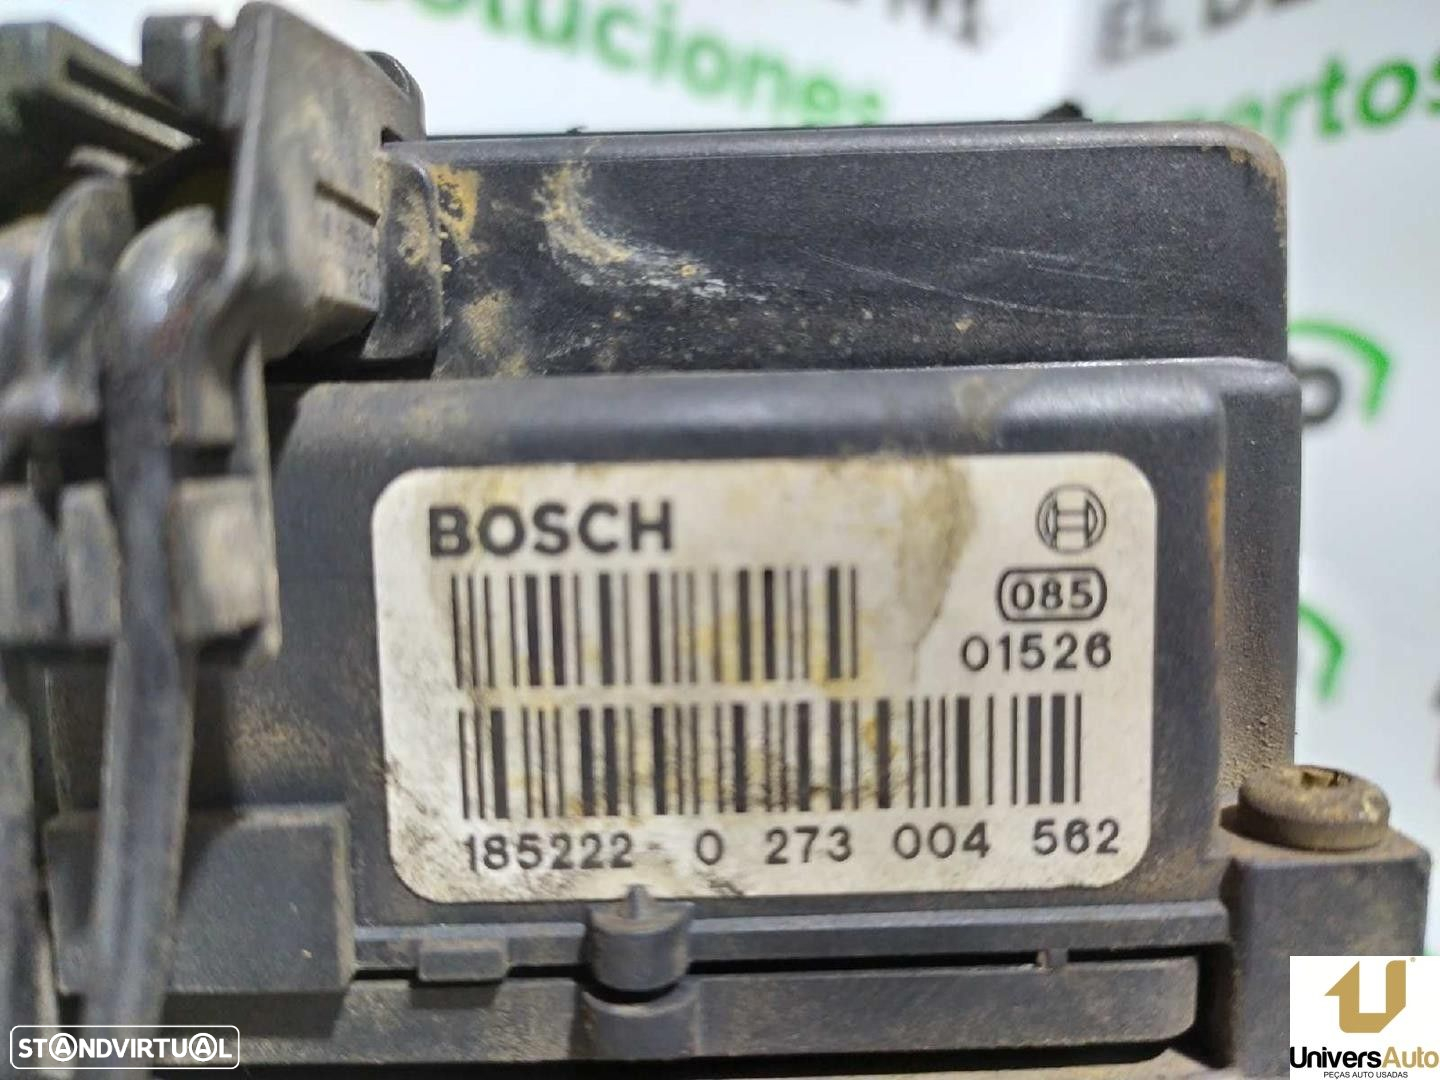 ABS PEUGEOT 307 2002 -9643777980 - 2